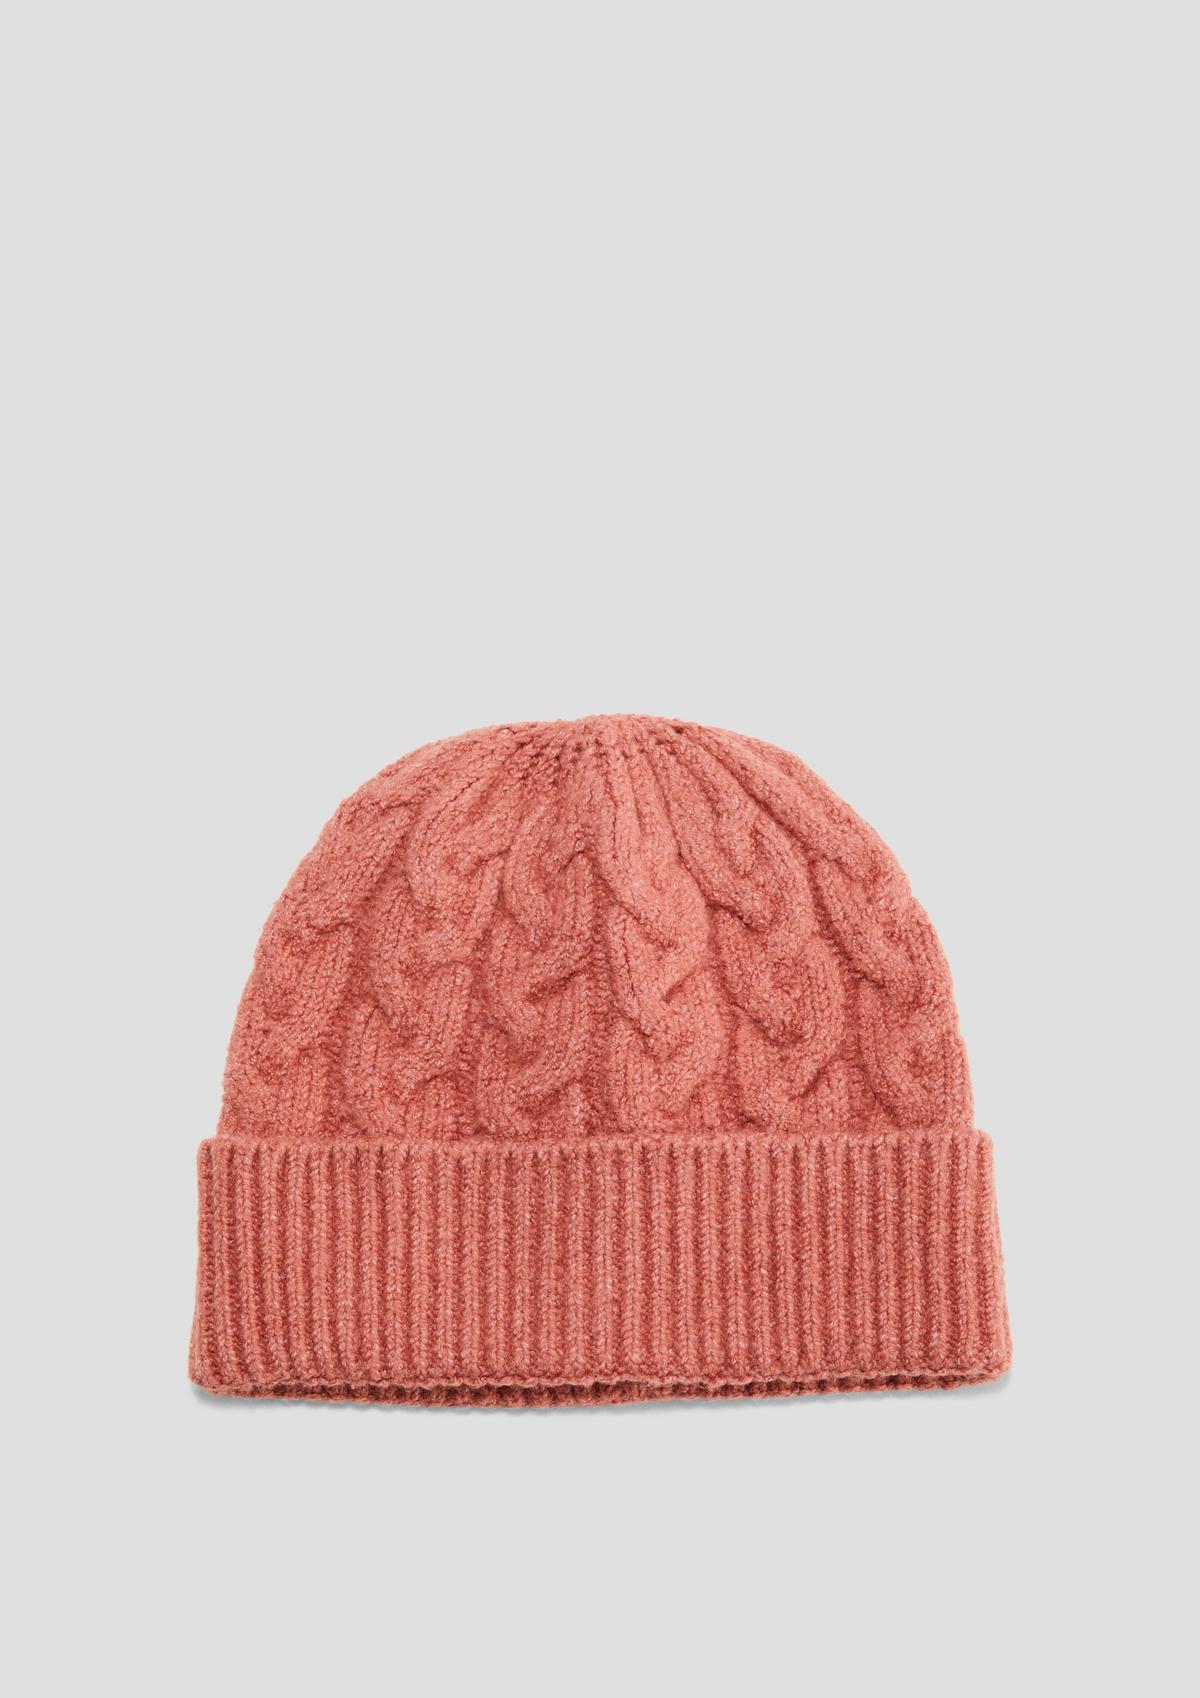 Cotton blend knitted hat